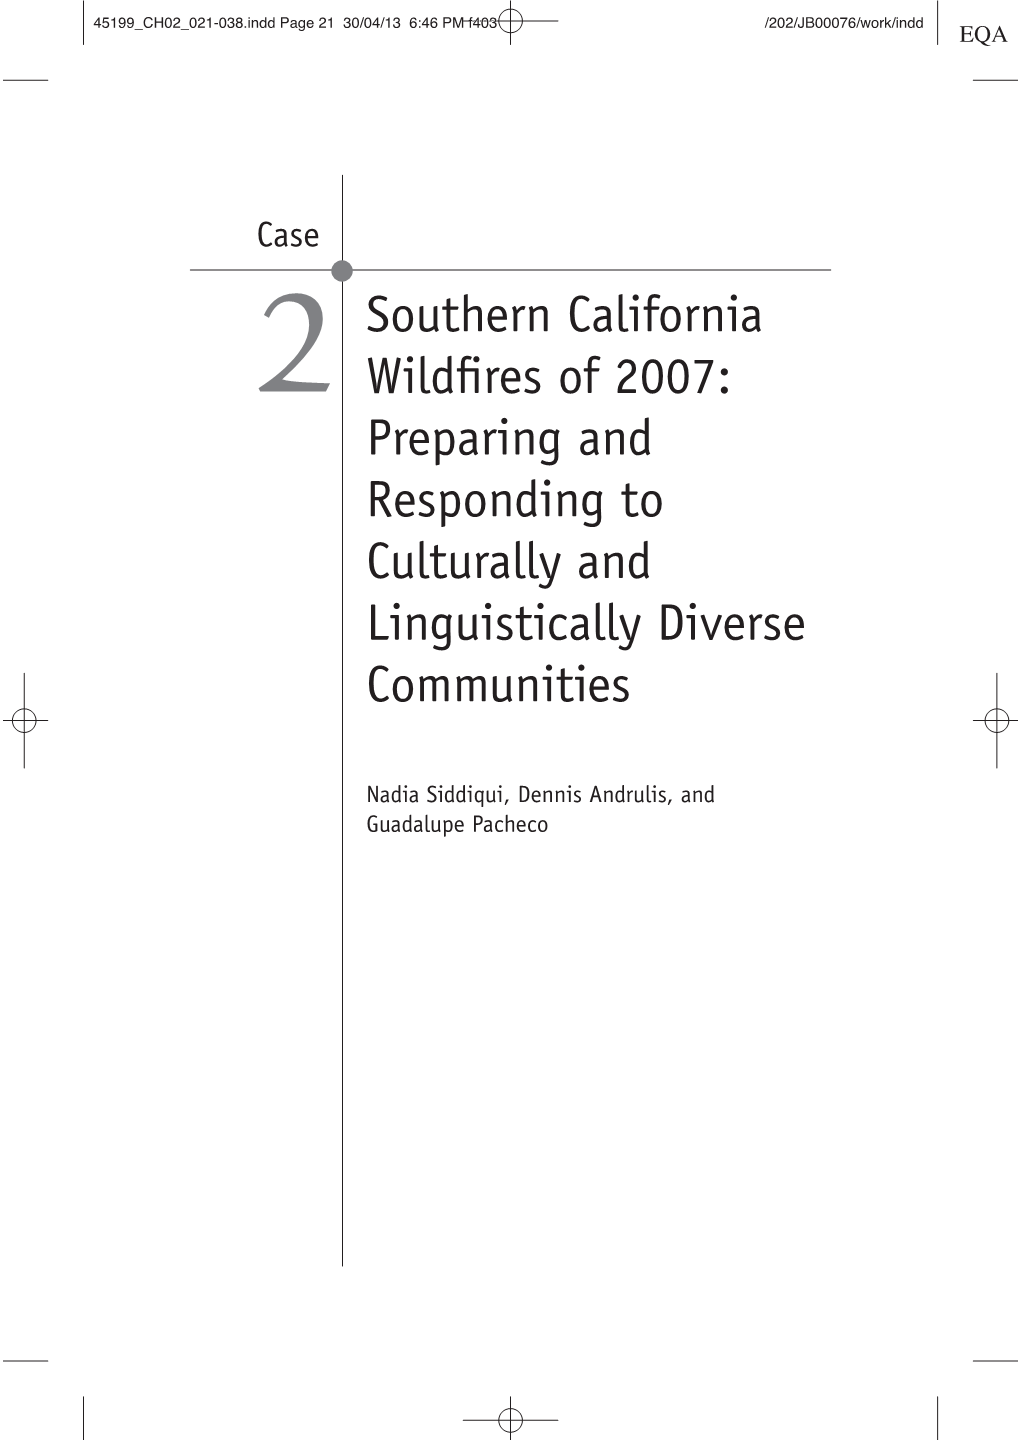 Southern California Wildfires of 2007: Preparing and Responding To